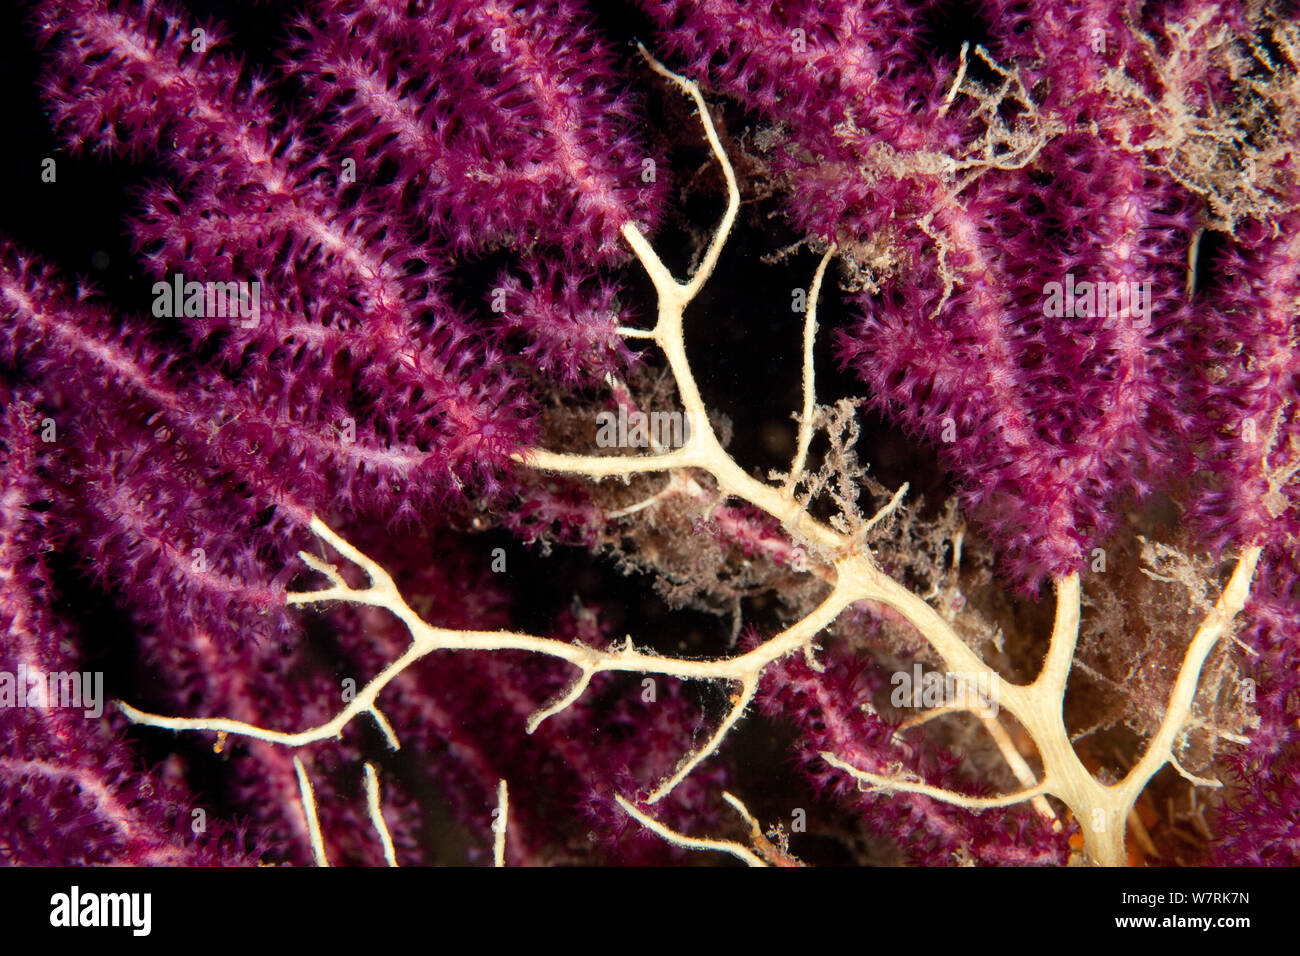 Red seafan (Paramuricea clavata) damaged from the high temperature of the water, Ischia Island, Italy, Tyrrhenian Sea, Mediterranean Stock Photo